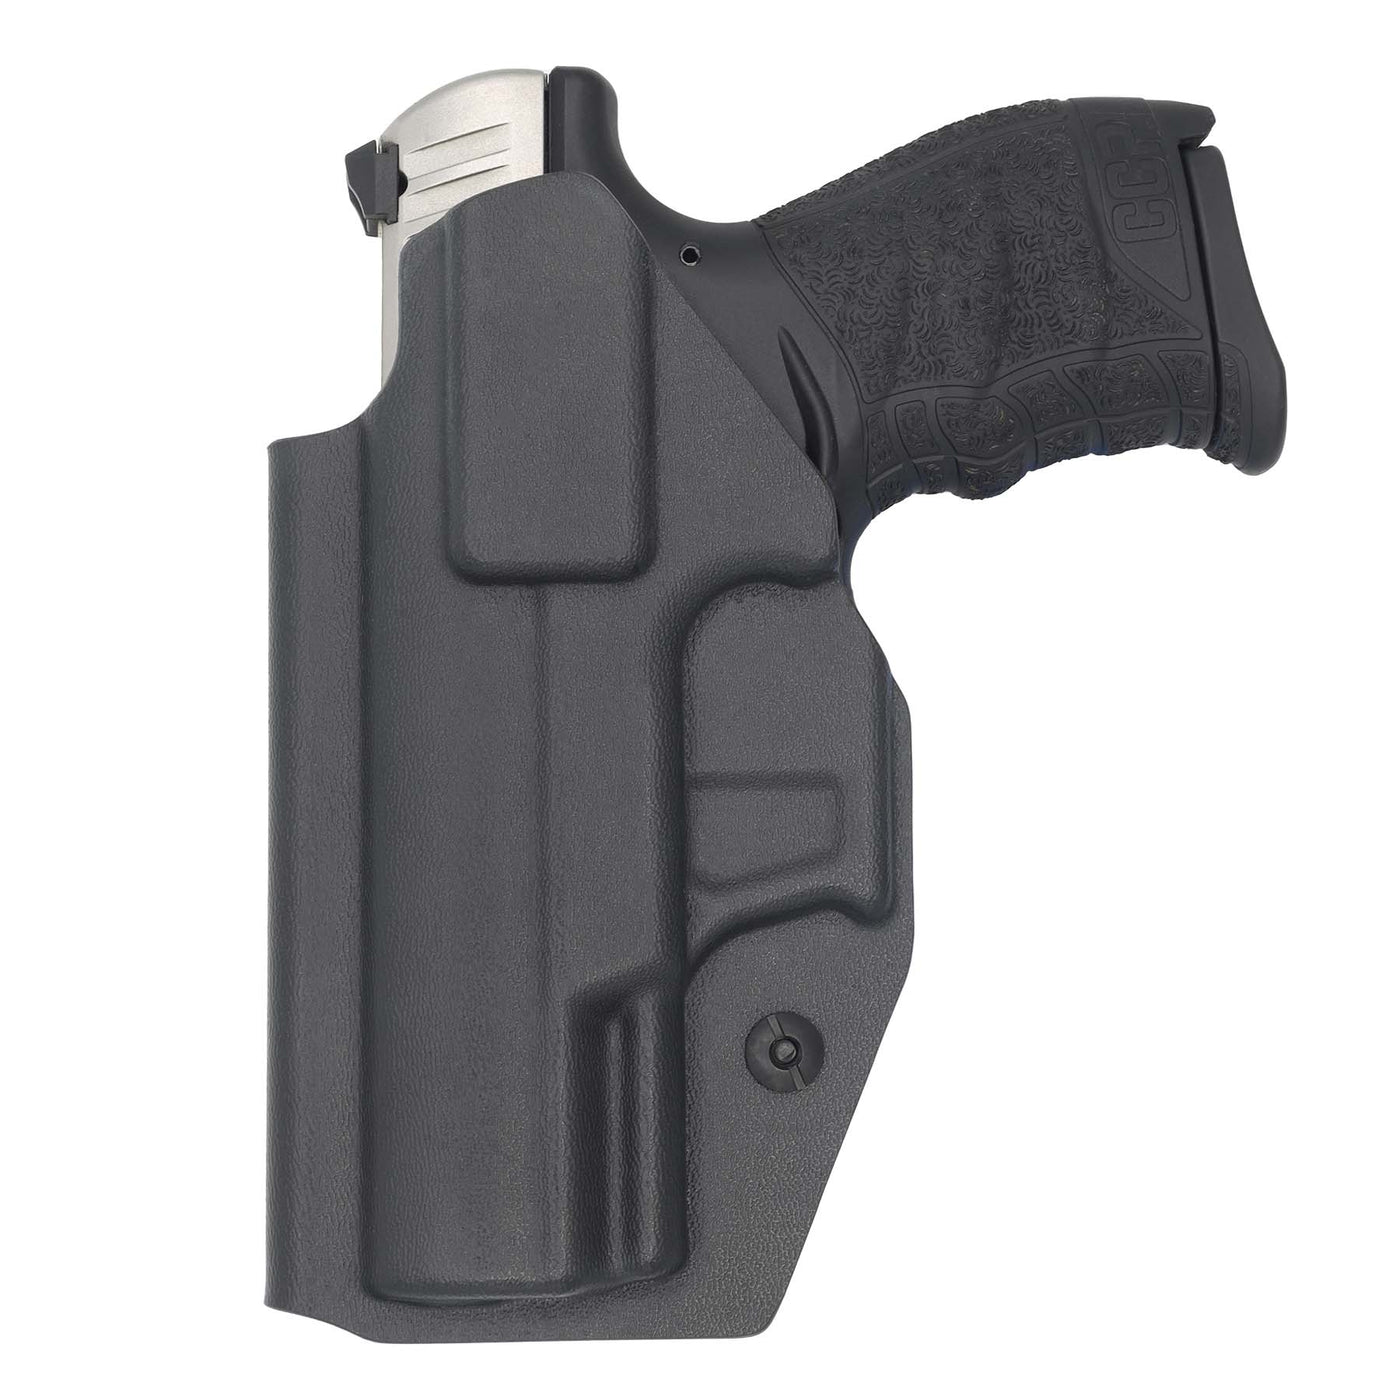 C&G Holsters IWB inside the waistband Holster for the Walther CCP holstered position rear view